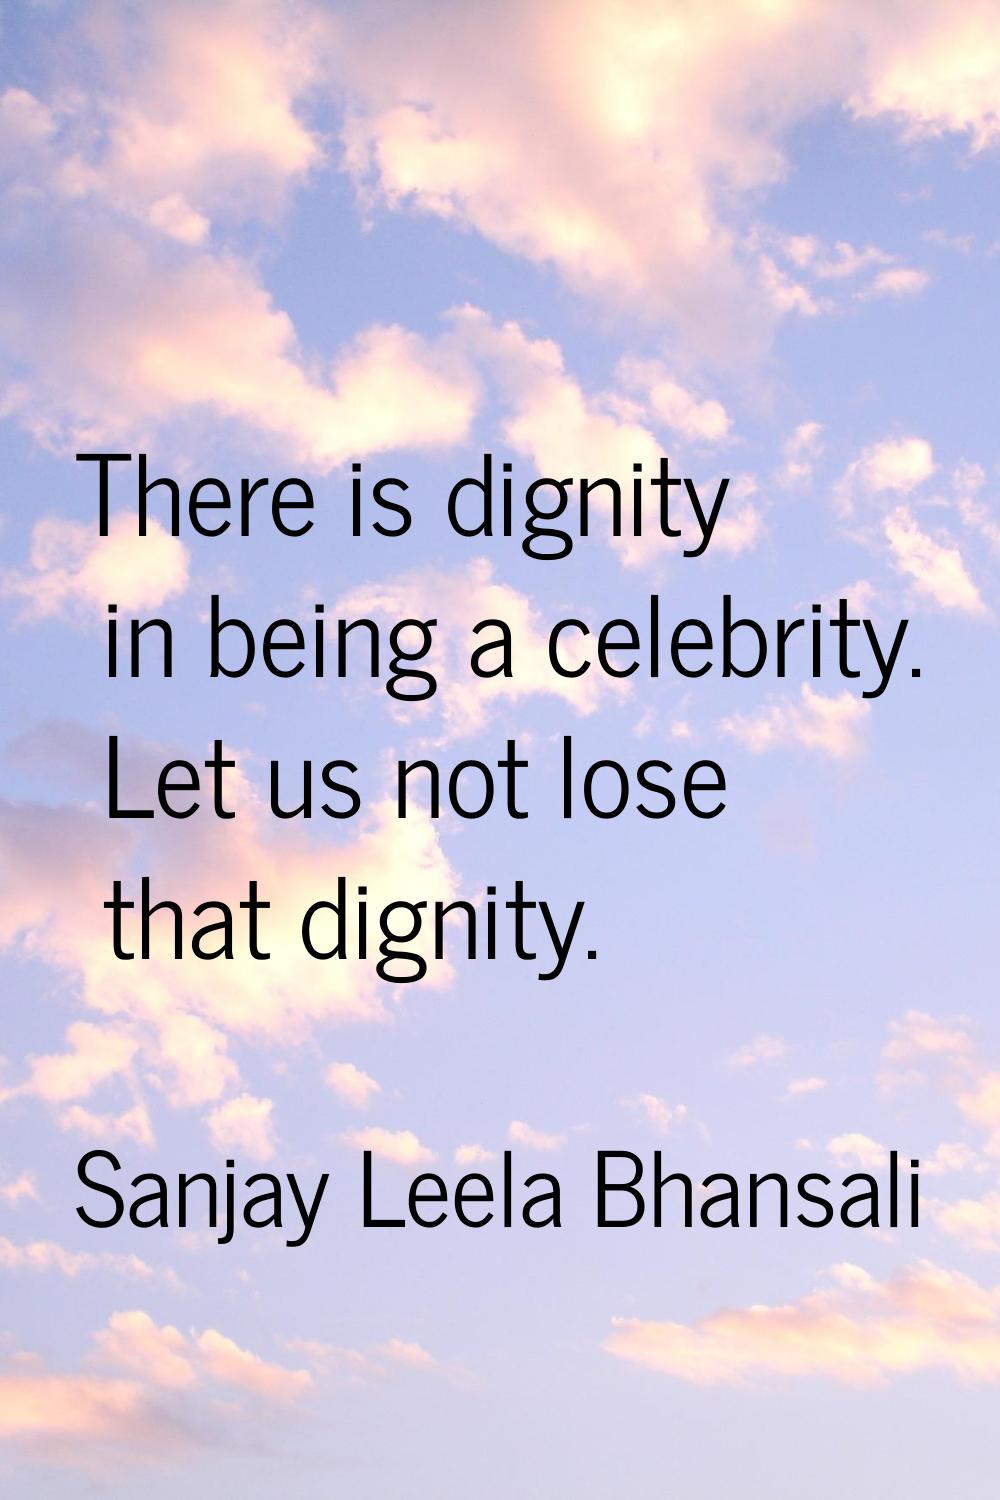 There is dignity in being a celebrity. Let us not lose that dignity.